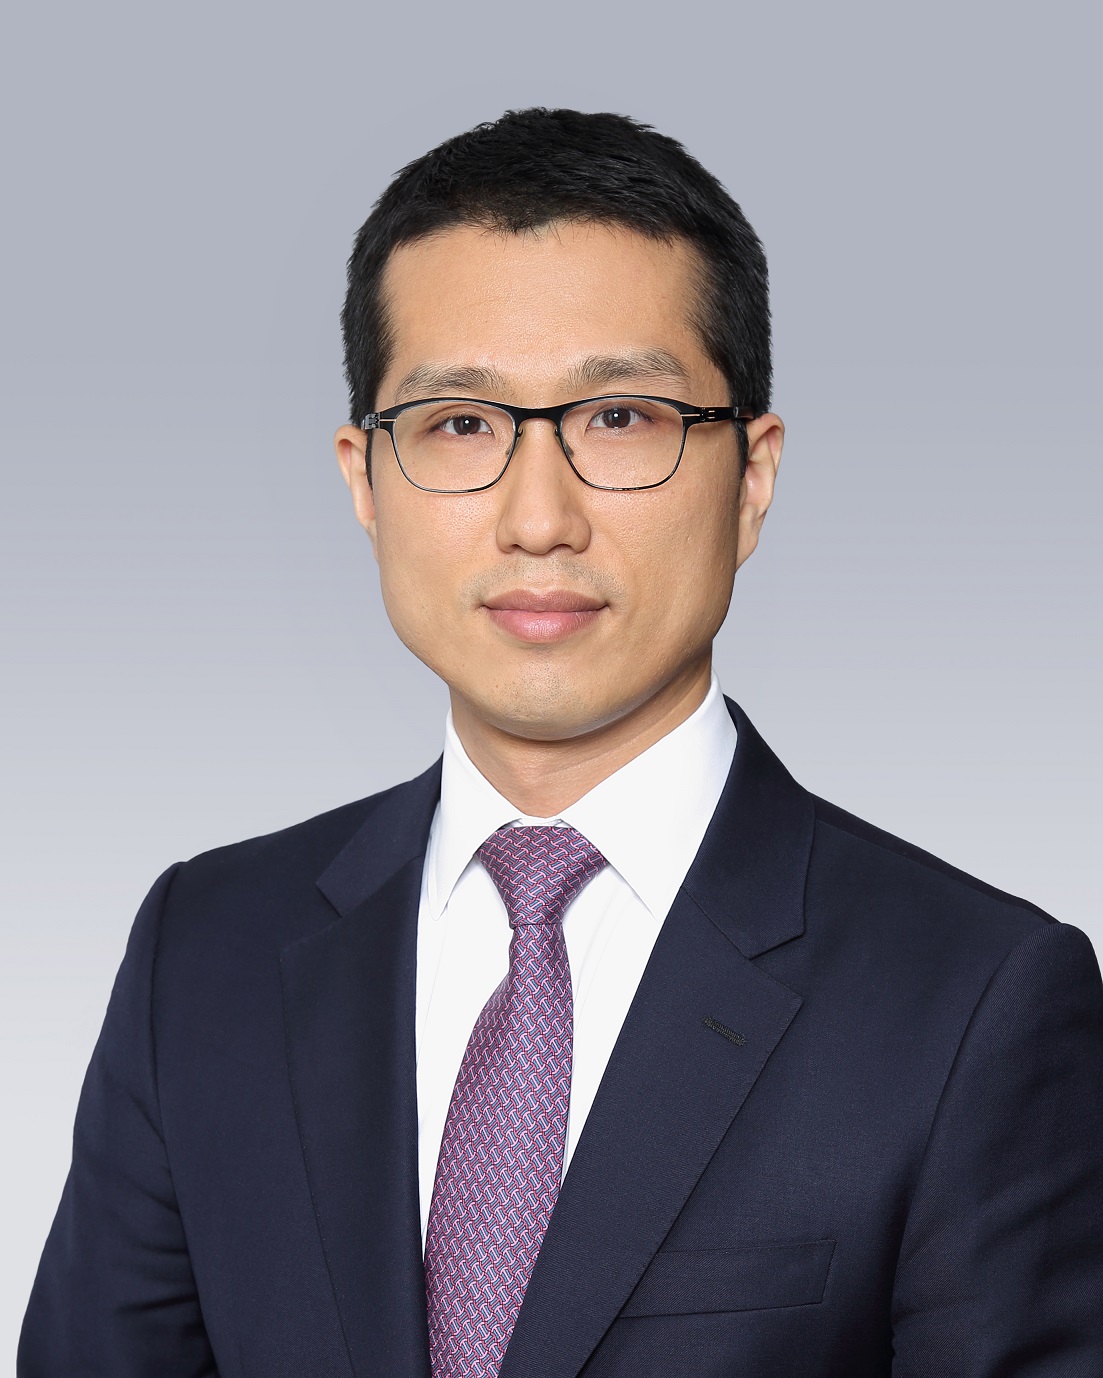 David Soh, Portfolio Manager and Head of Research, RBC Asian Equity, RCB BlueBay AM